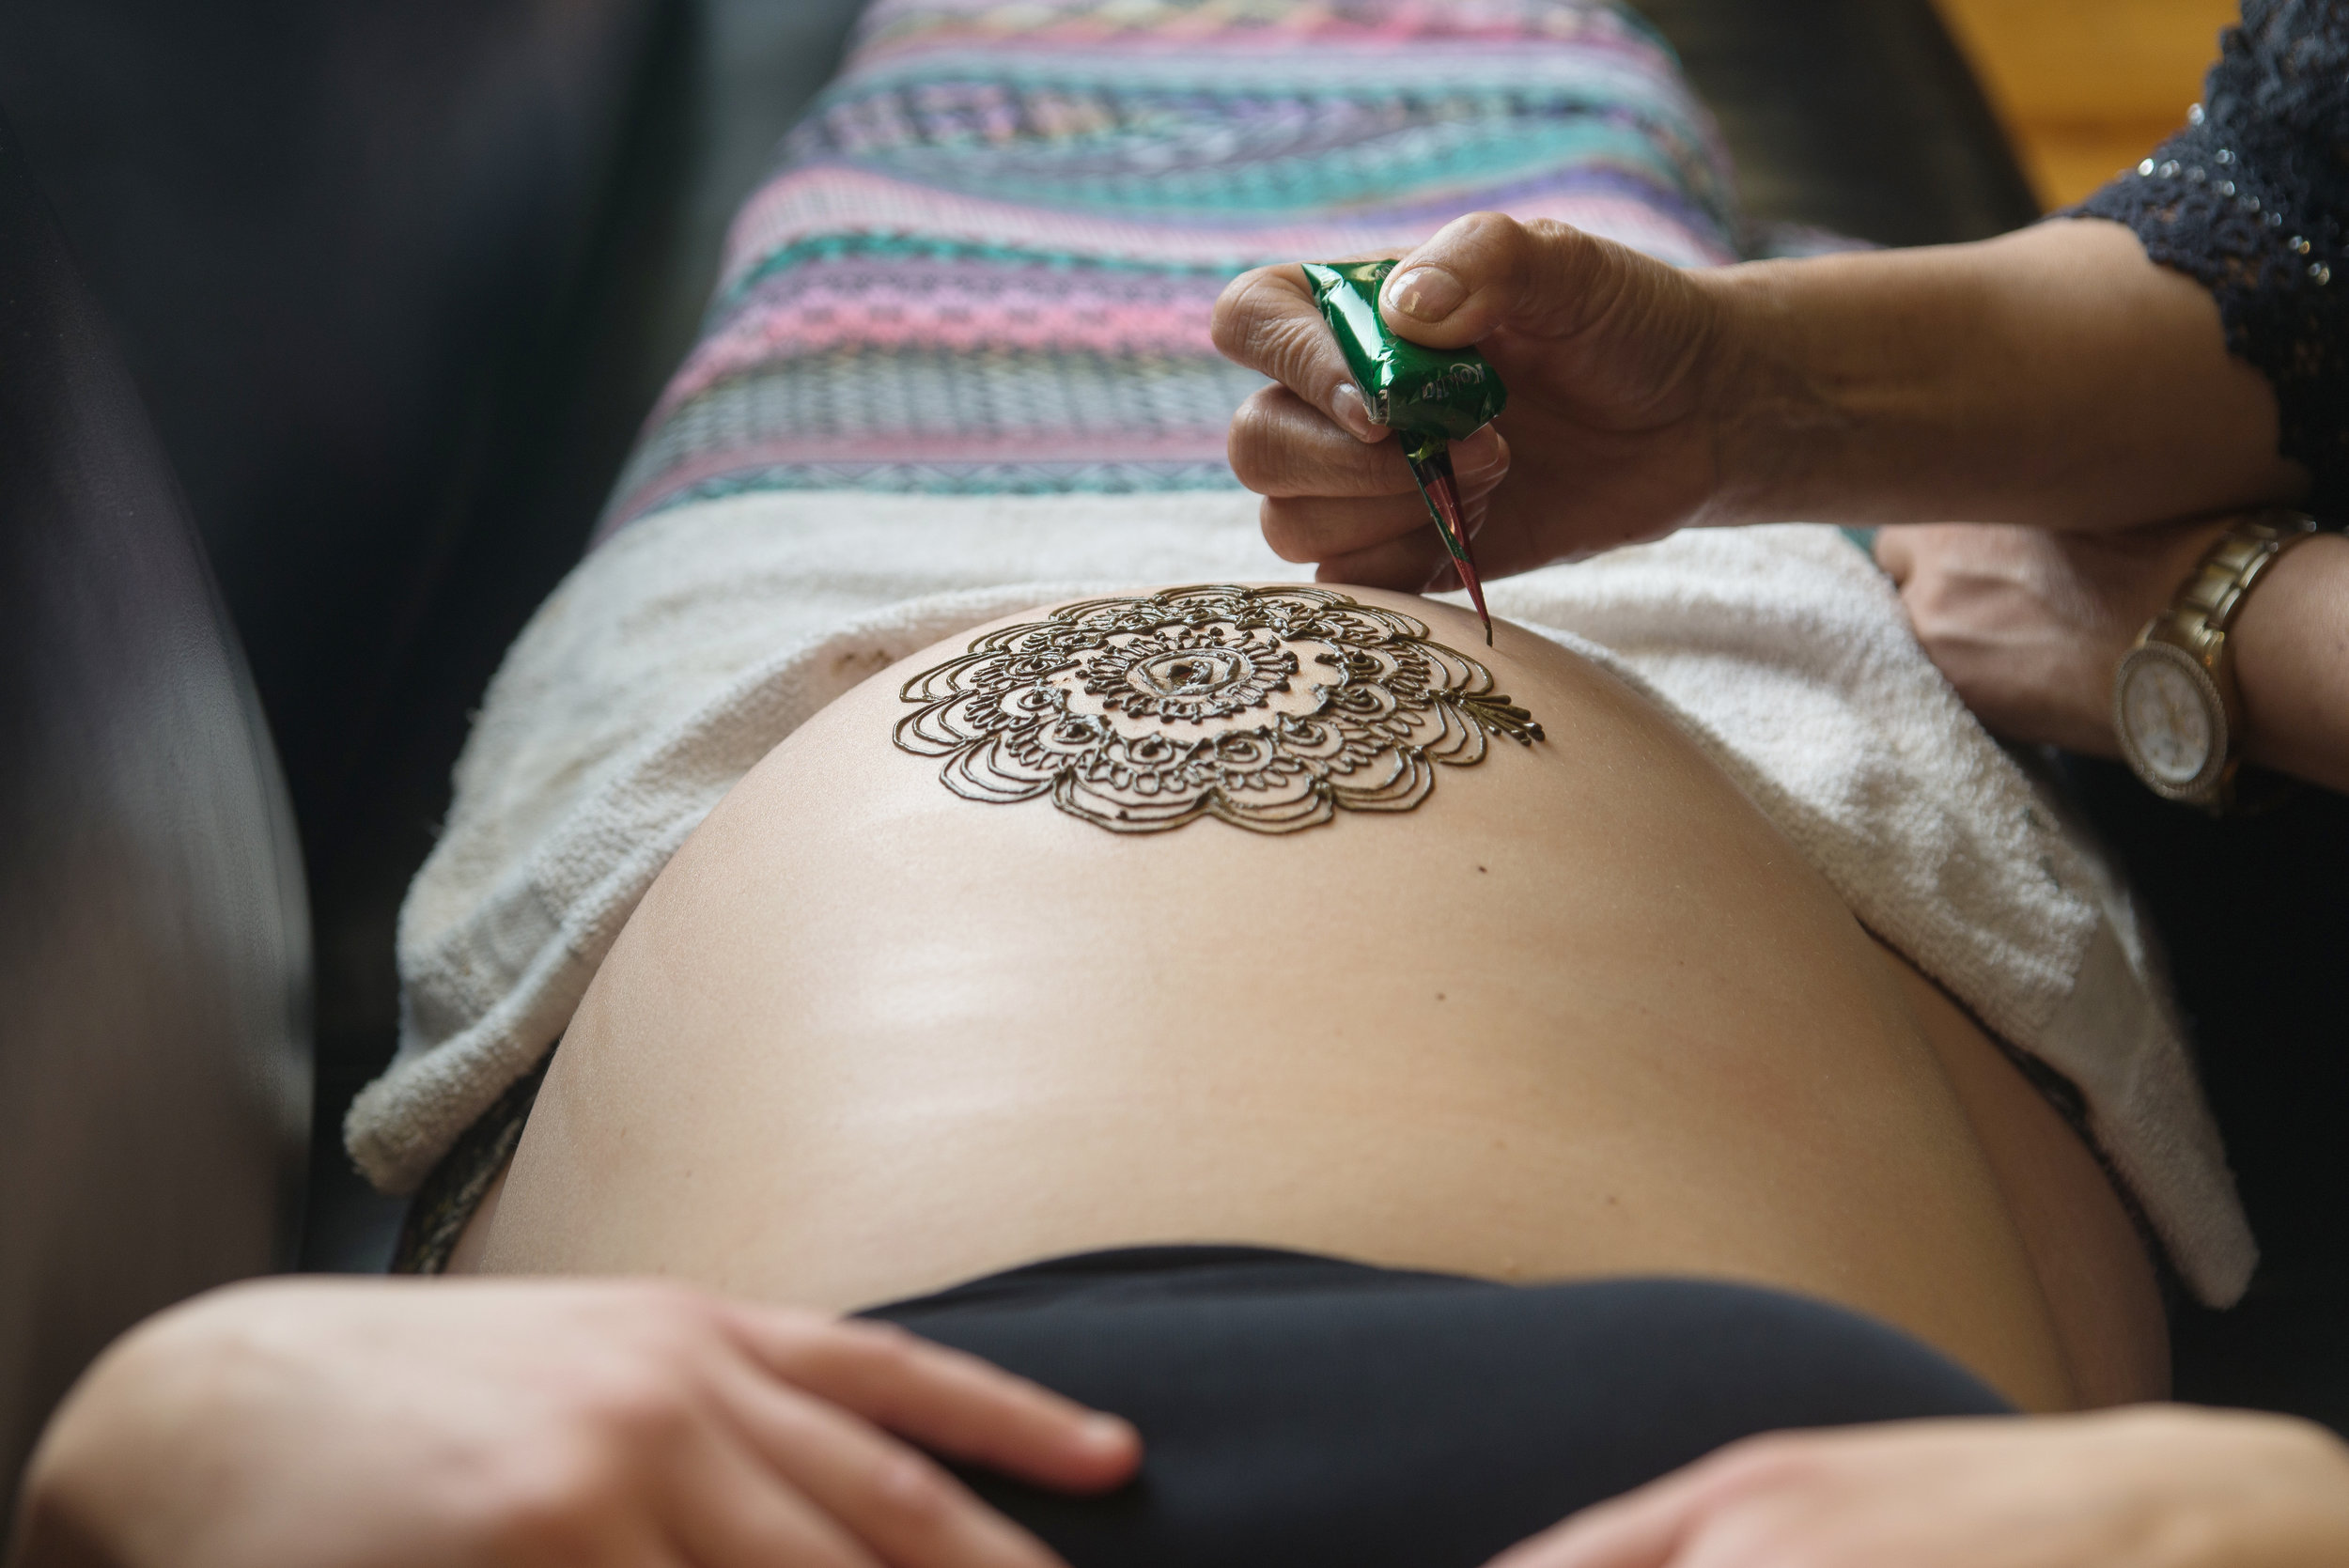 st-louis-maternity-henna-photography-close-up-of-henna-being-applied-to-belly.jpg